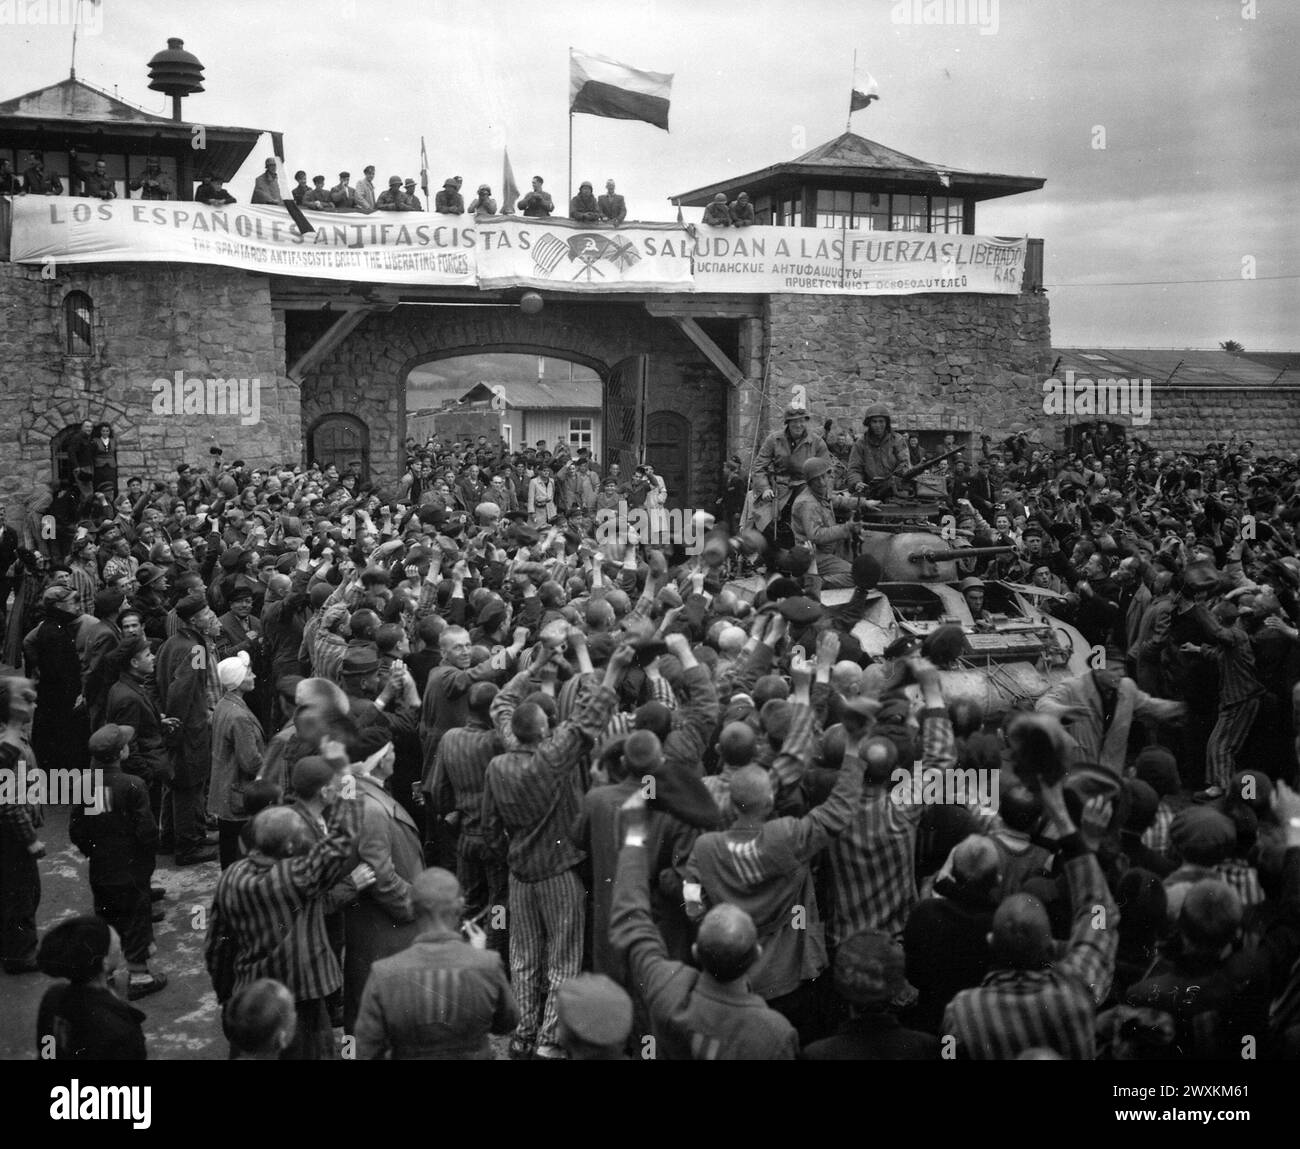 Liberated prisoners in the Mauthausen concentration camp near Linz, Austria, give rousing welcome to Cavalrymen of the 11th Armored Division. The banner across the wall was made by Spanish Loyalist prisoners ca. May 6, 1945 Stock Photo